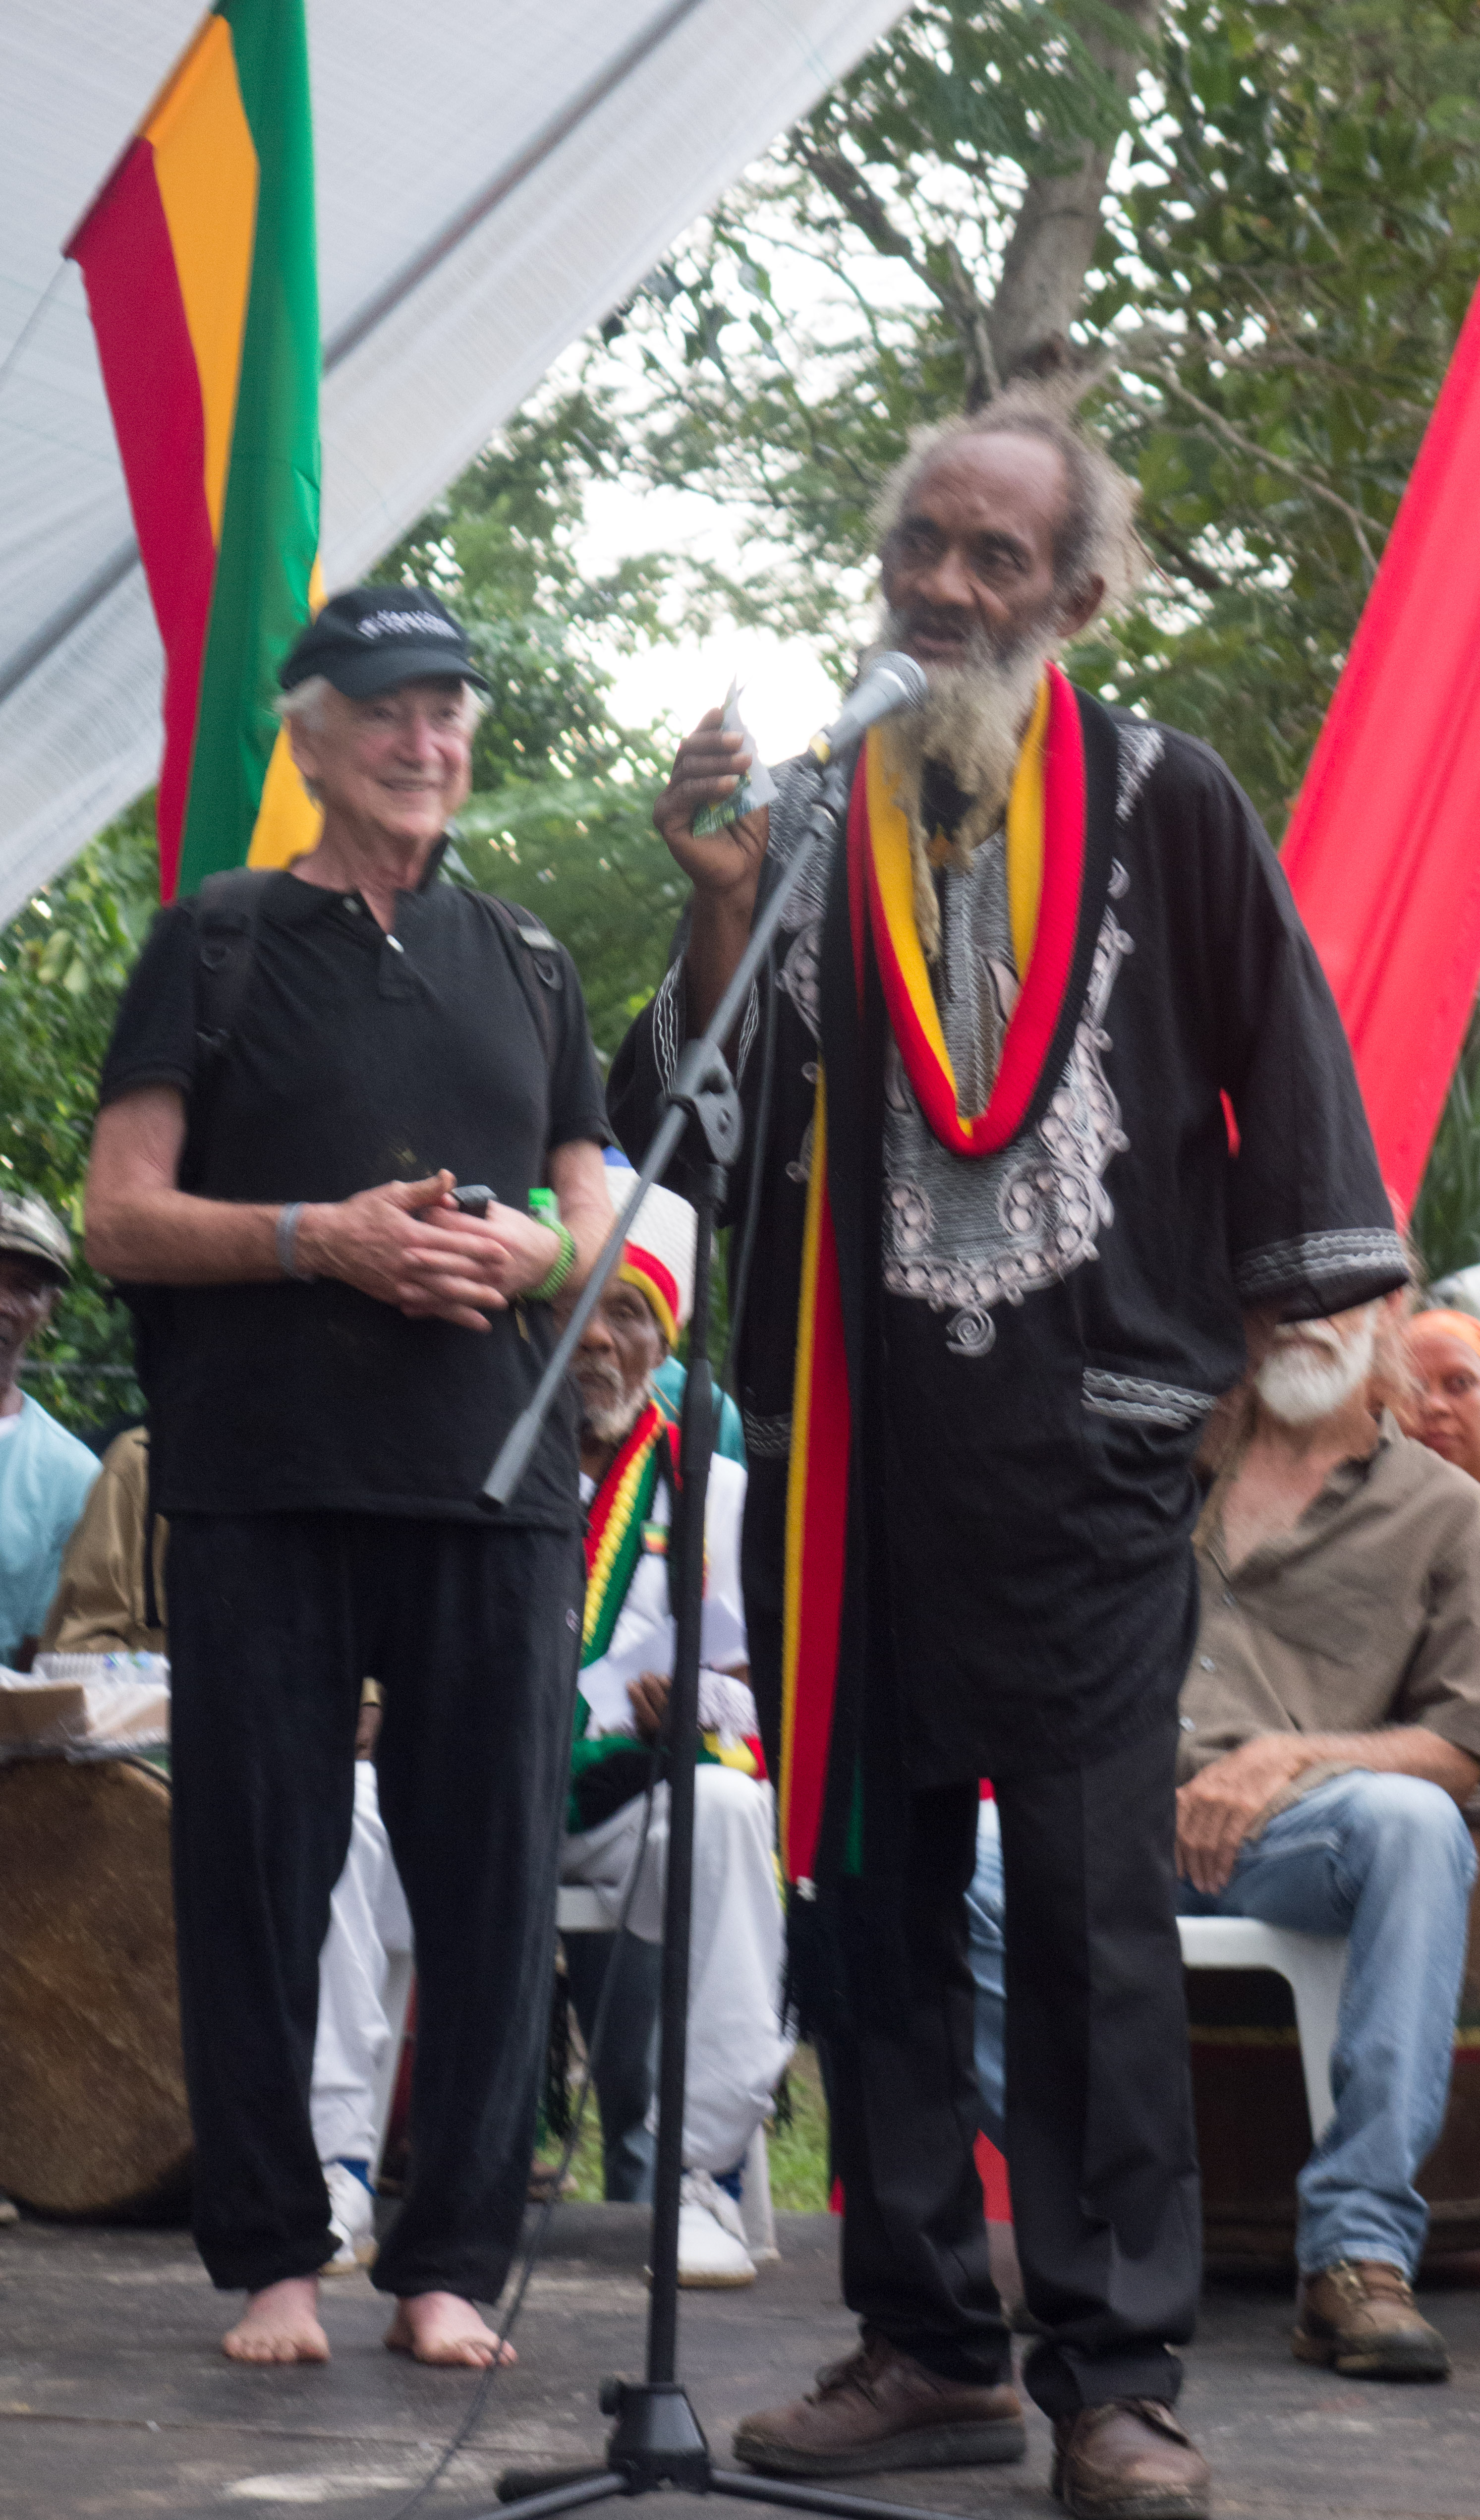 Charles Nesson and Ras Iyah V at the Rastafari Rootsfest. Photo by Fern Nesson, used with permission.